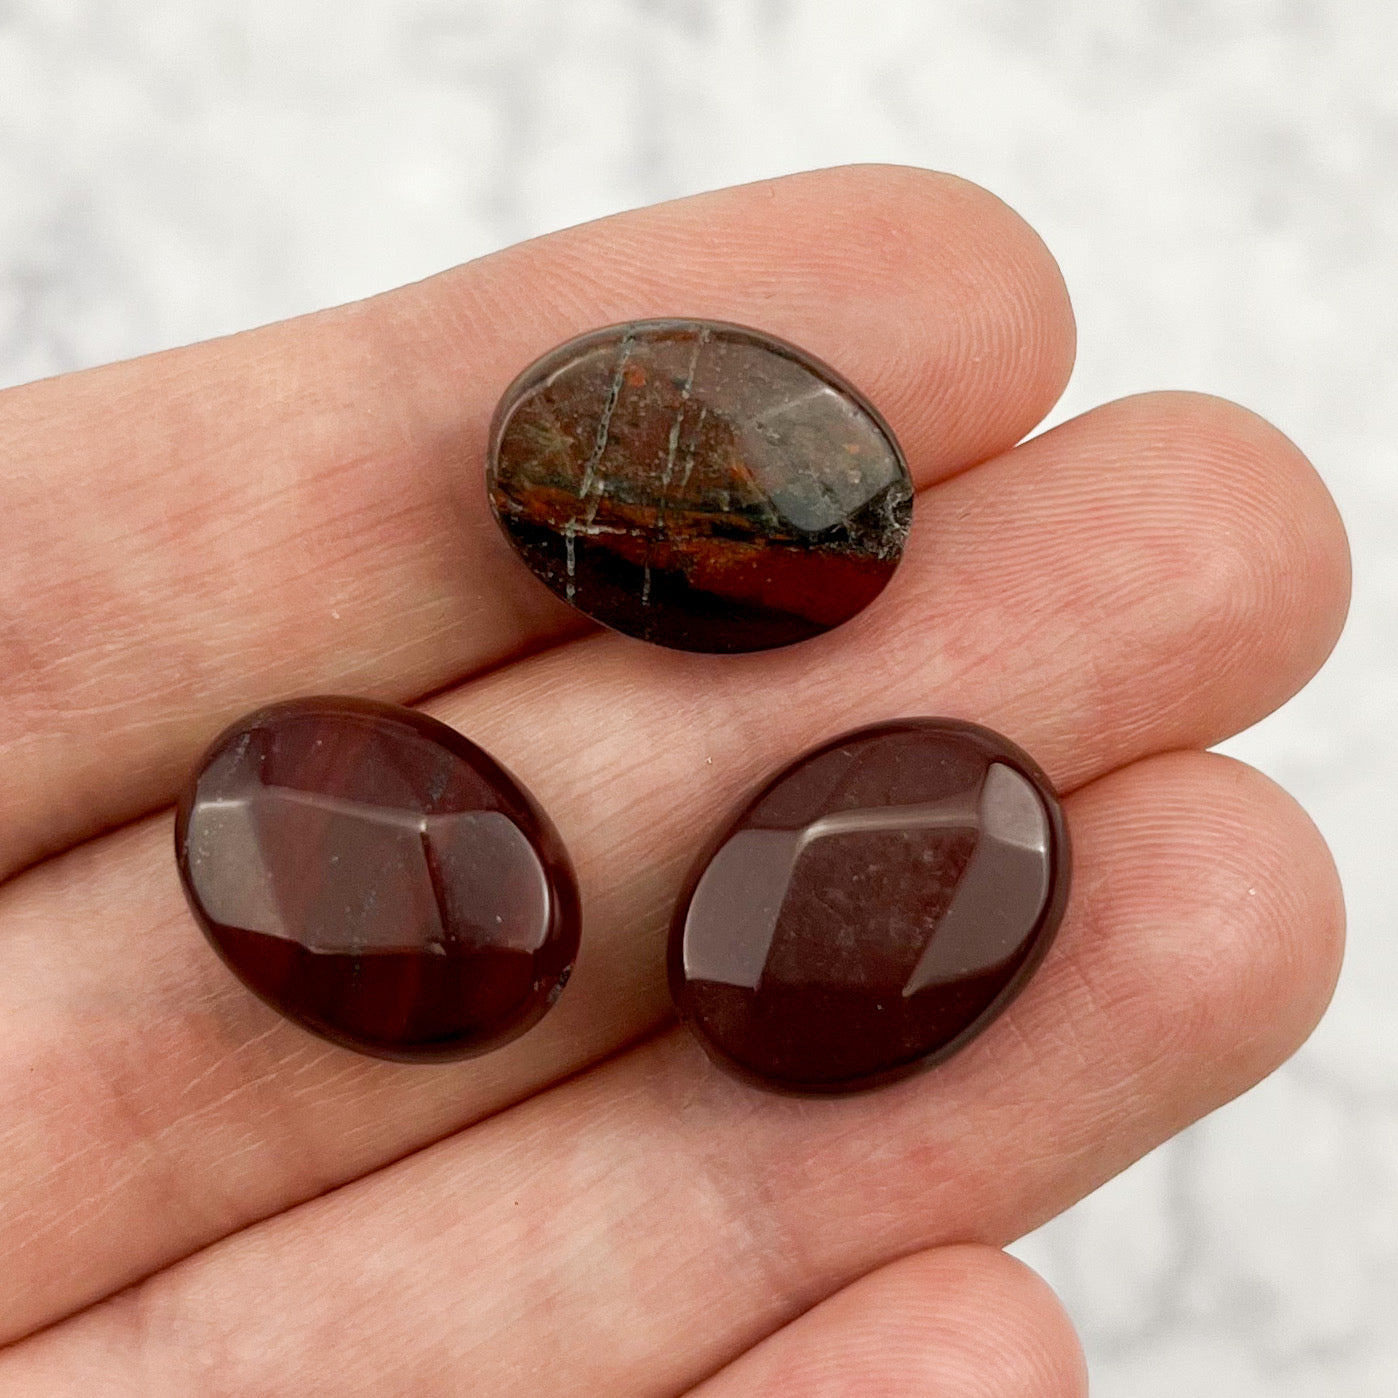 17mm x 13mm Red Jasper Faceted Oval Focal Bead Pack (3 Beads)